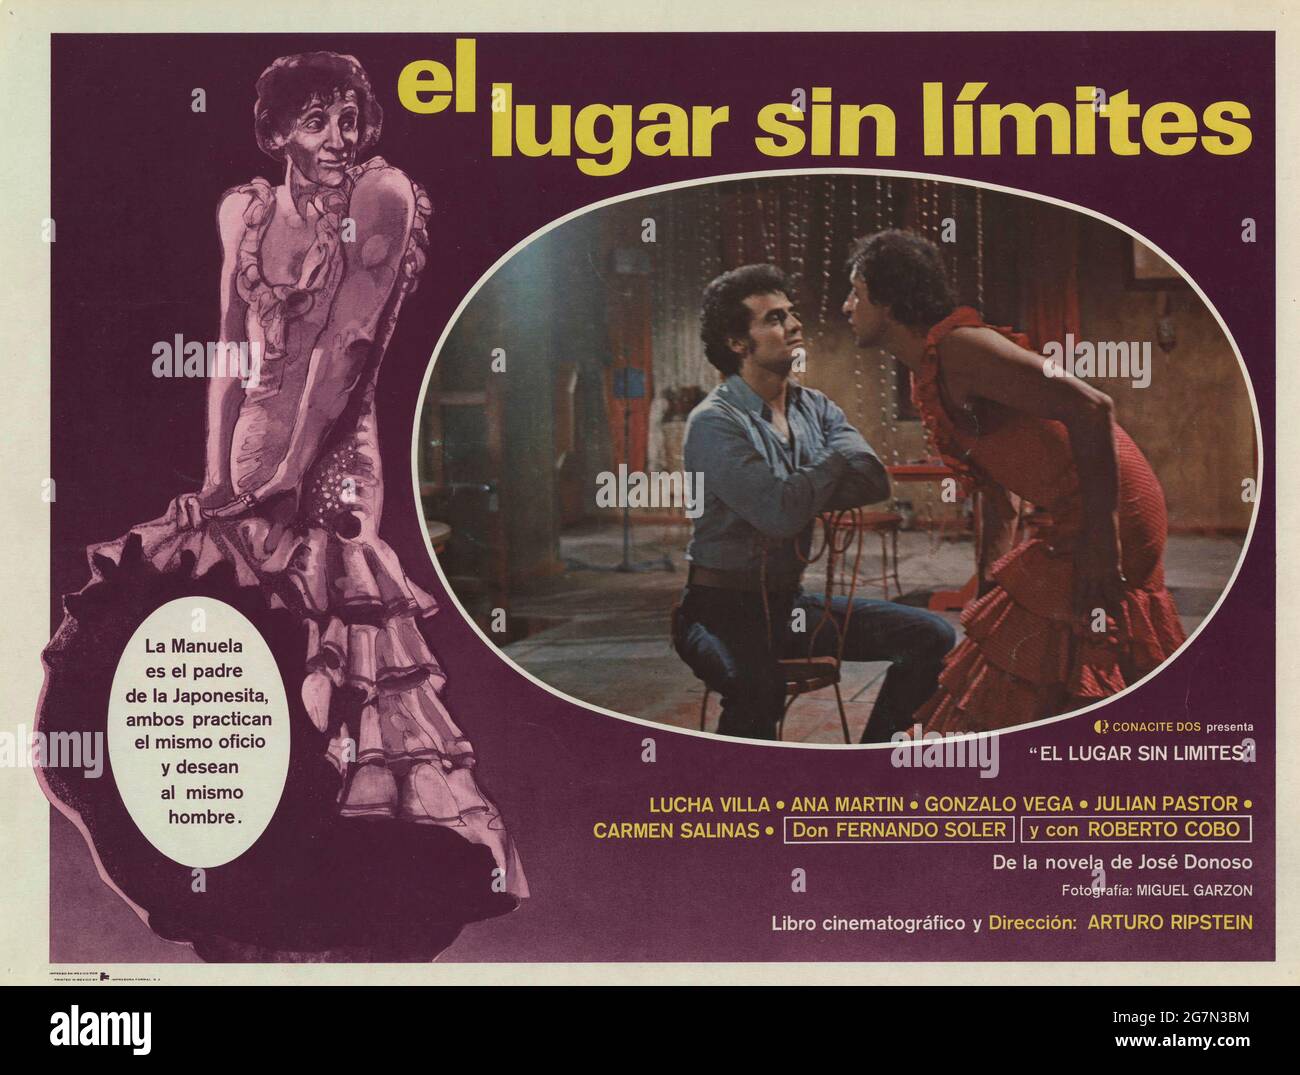 THE PLACE WITHOUT LIMITS (1978) -Original title: EL LUGAR SIN LIMITES-, directed by ARTURO RIPSTEIN. Stock Photo